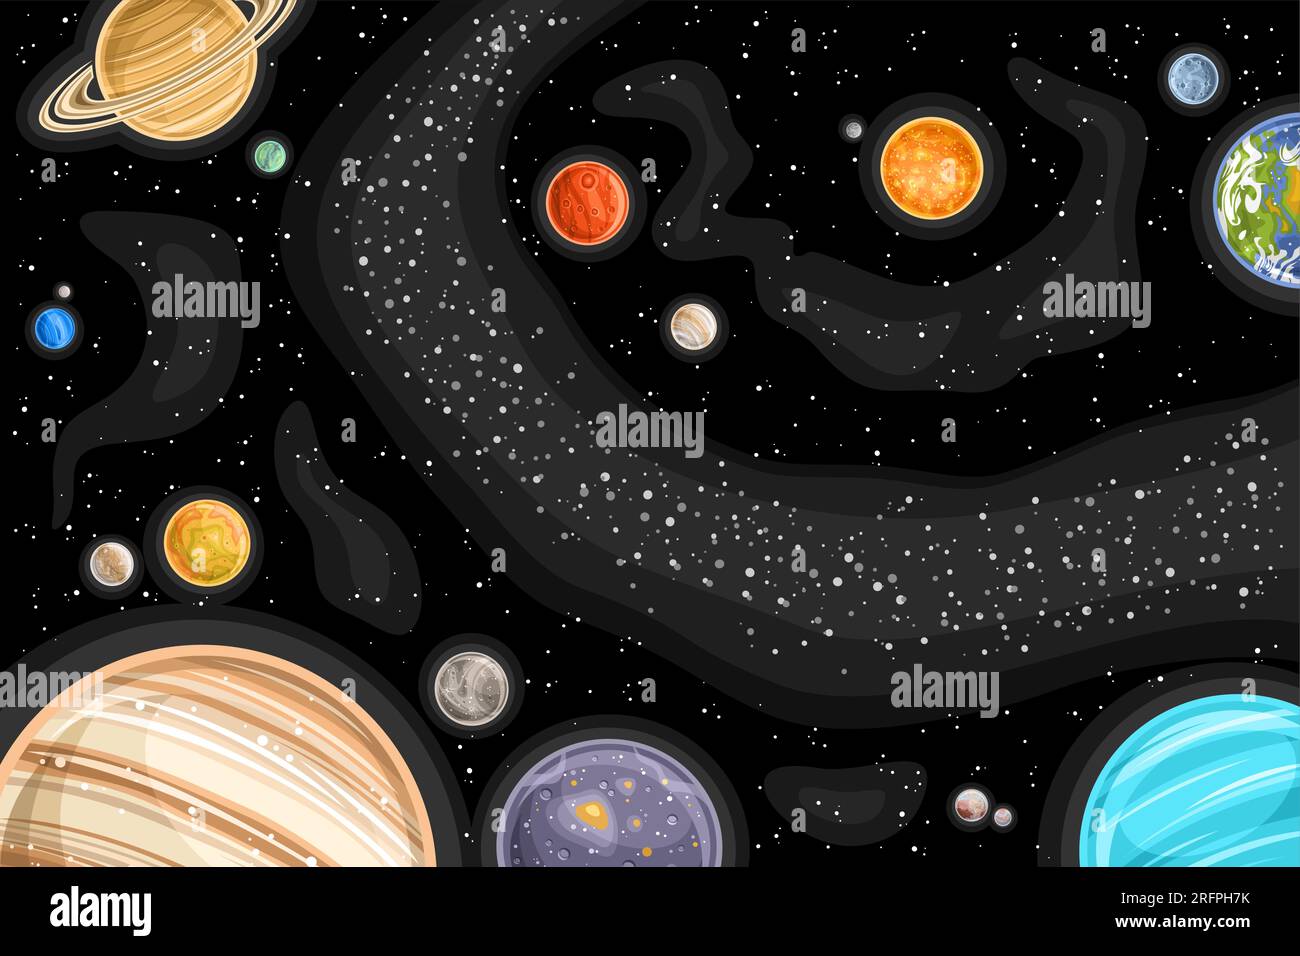 Vector Fantasy Space Chart, astronomical horizontal poster with illustration of variety colorful planets and asteroid belt in deep space, decorative c Stock Vector